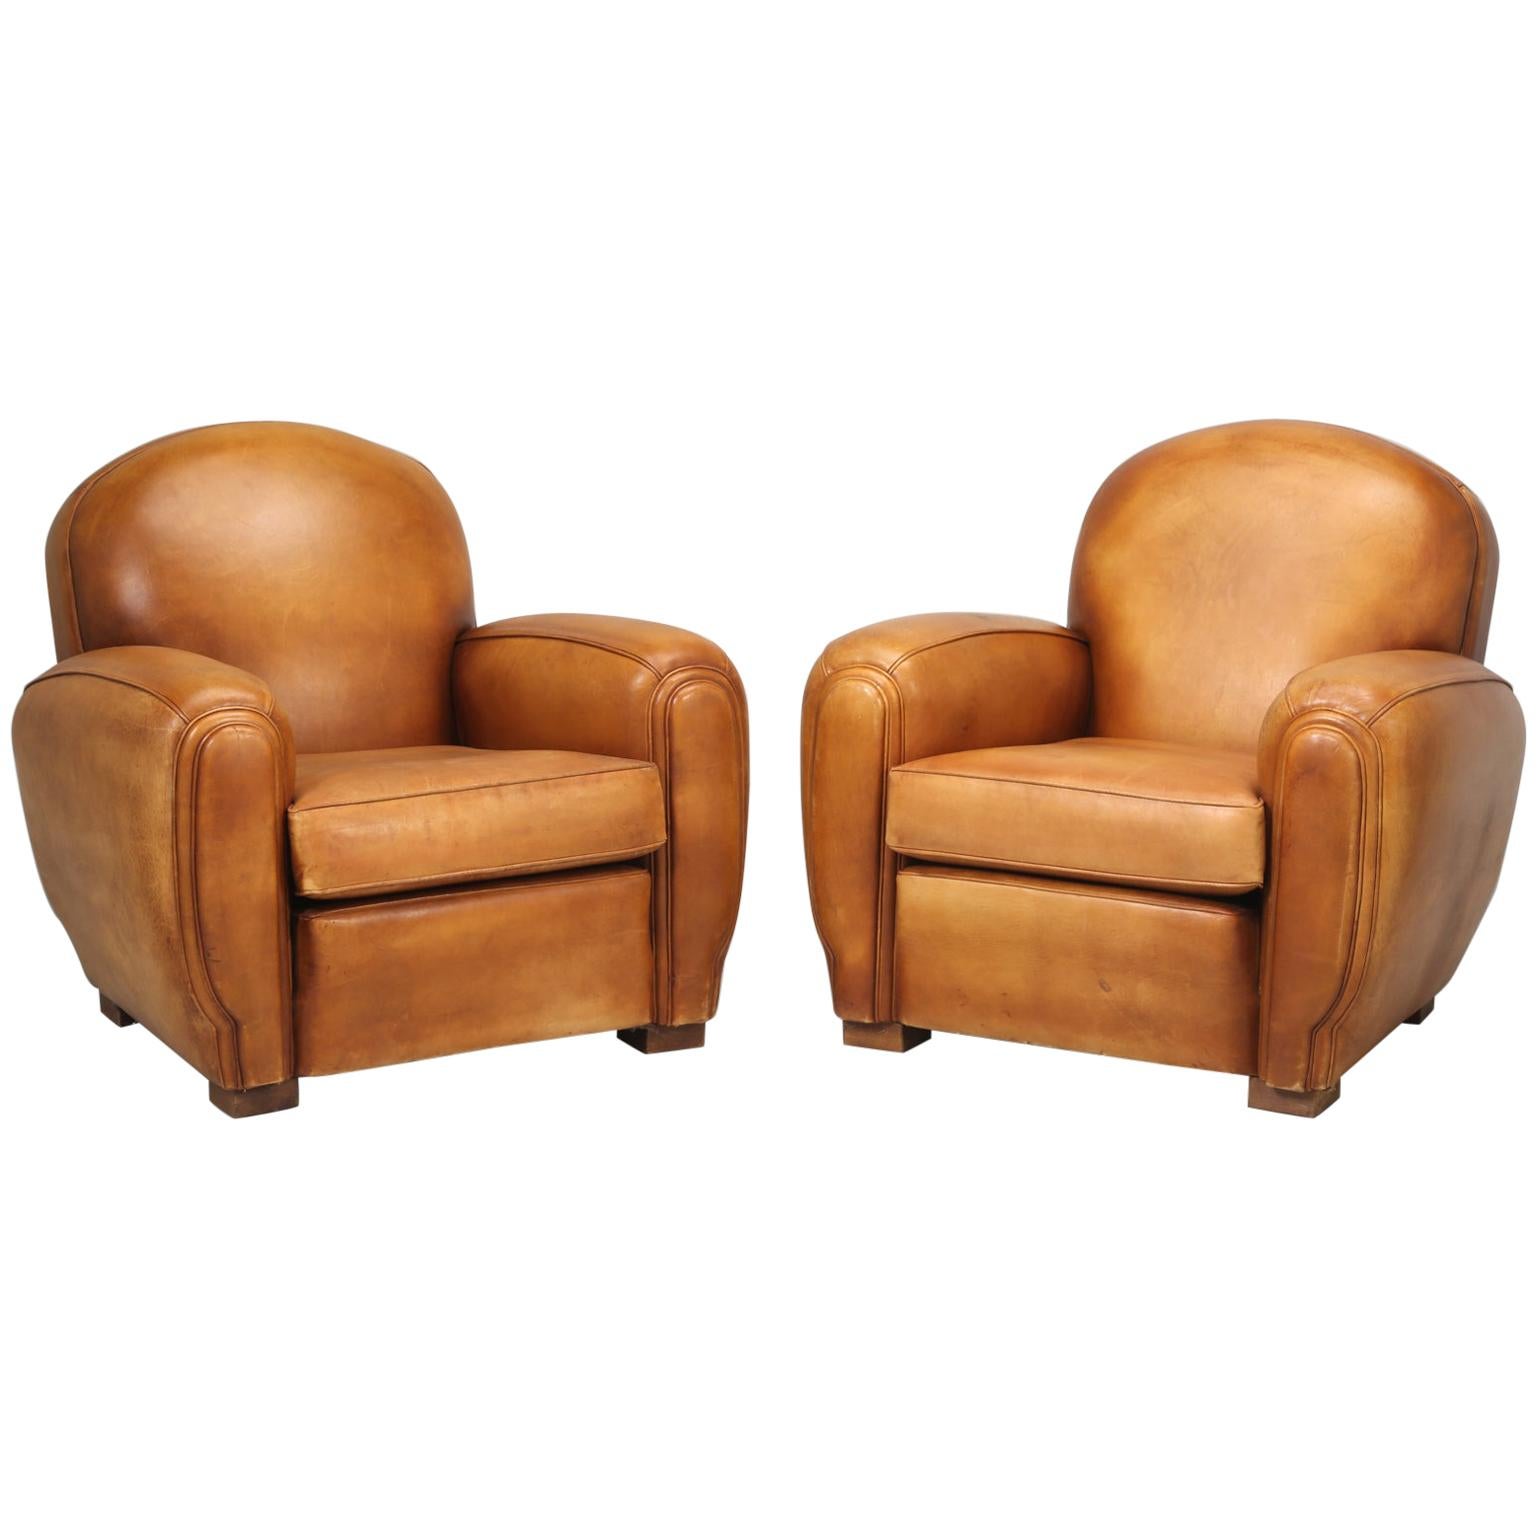 French All Original Leather Club Chairs, Simply the Finest Pair We've Ever Had